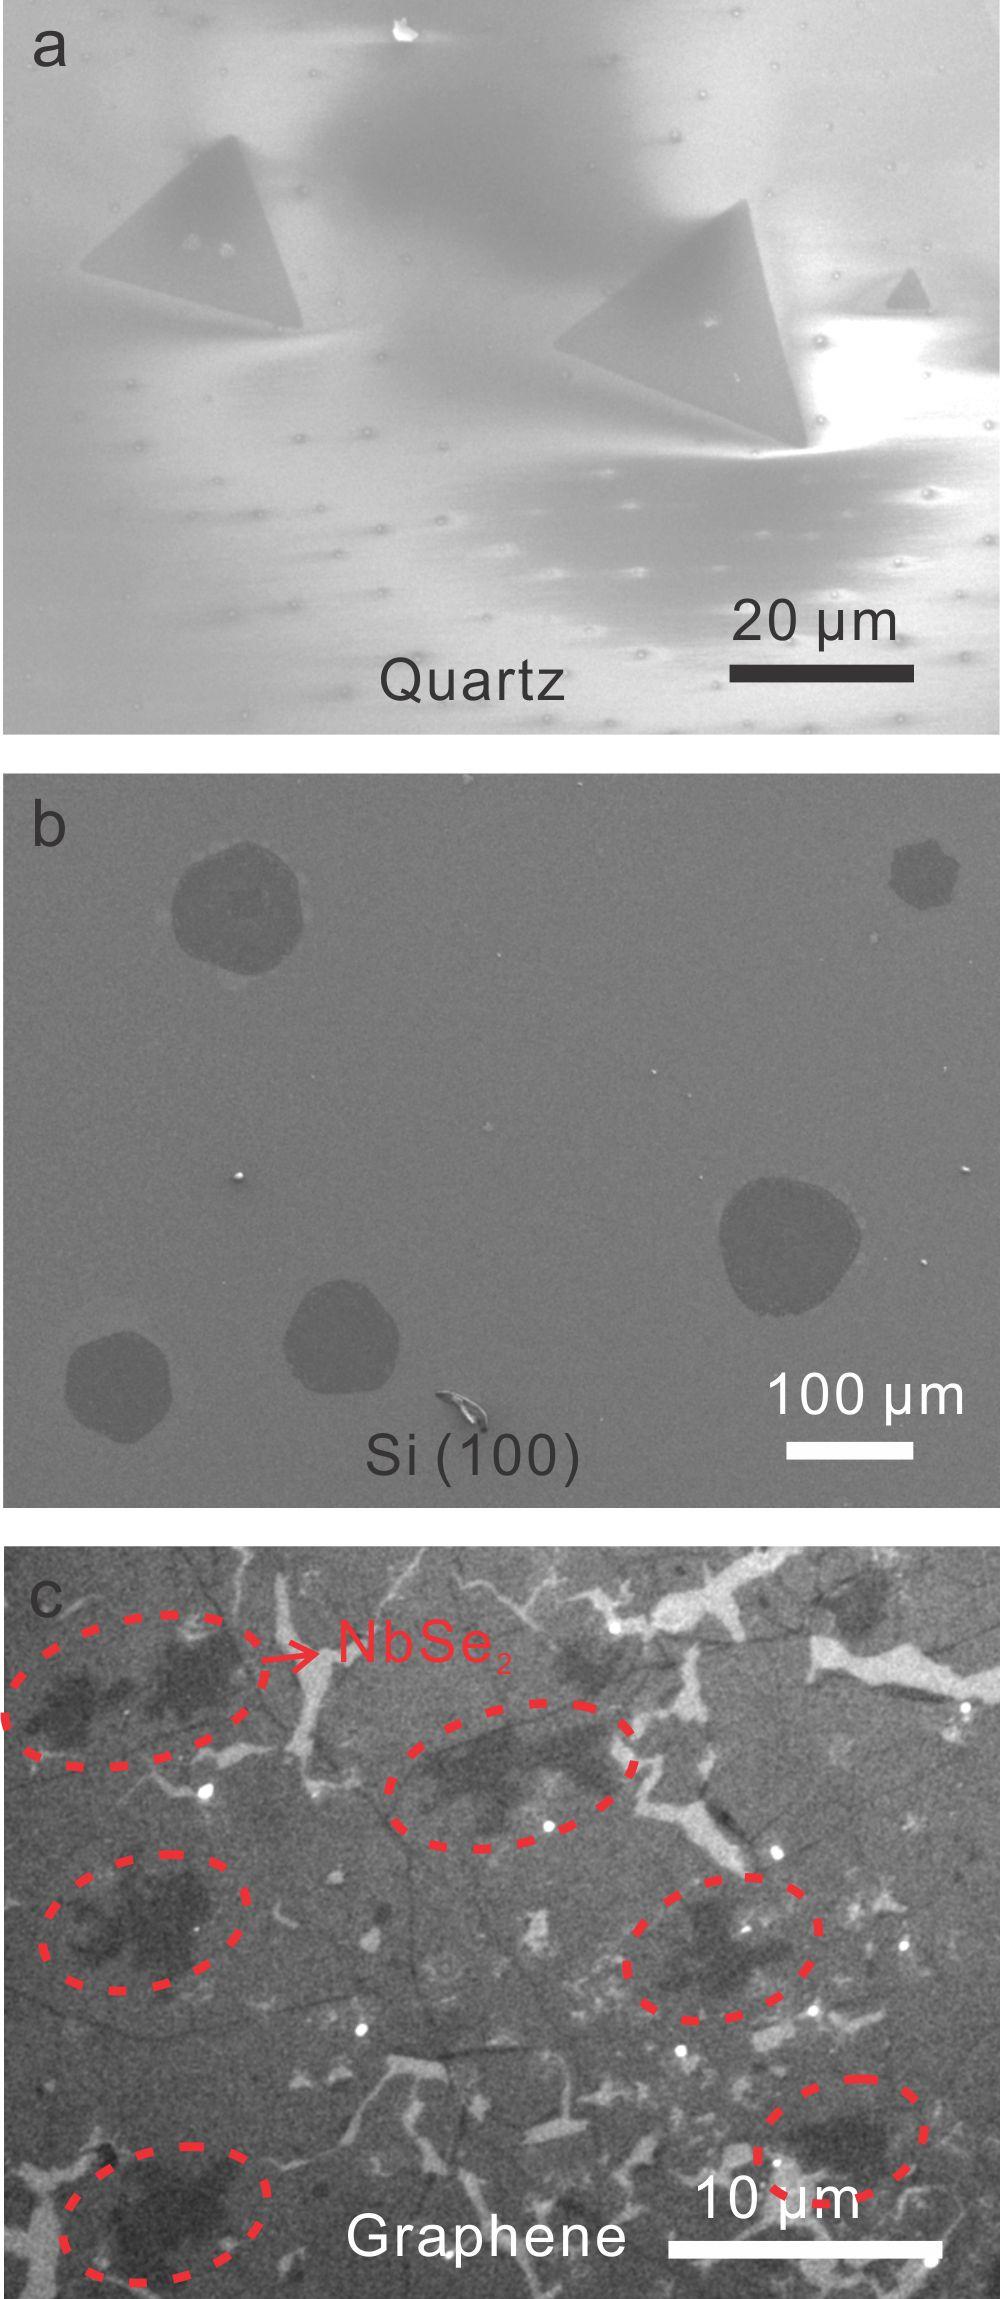 Supplementary Figure 3. SEM morphology of ultrathin NbSe2 layers grown on diverse substrates (a) quartz, (b) Si(100) (c) CVD graphene transferred to SiO2/Si.